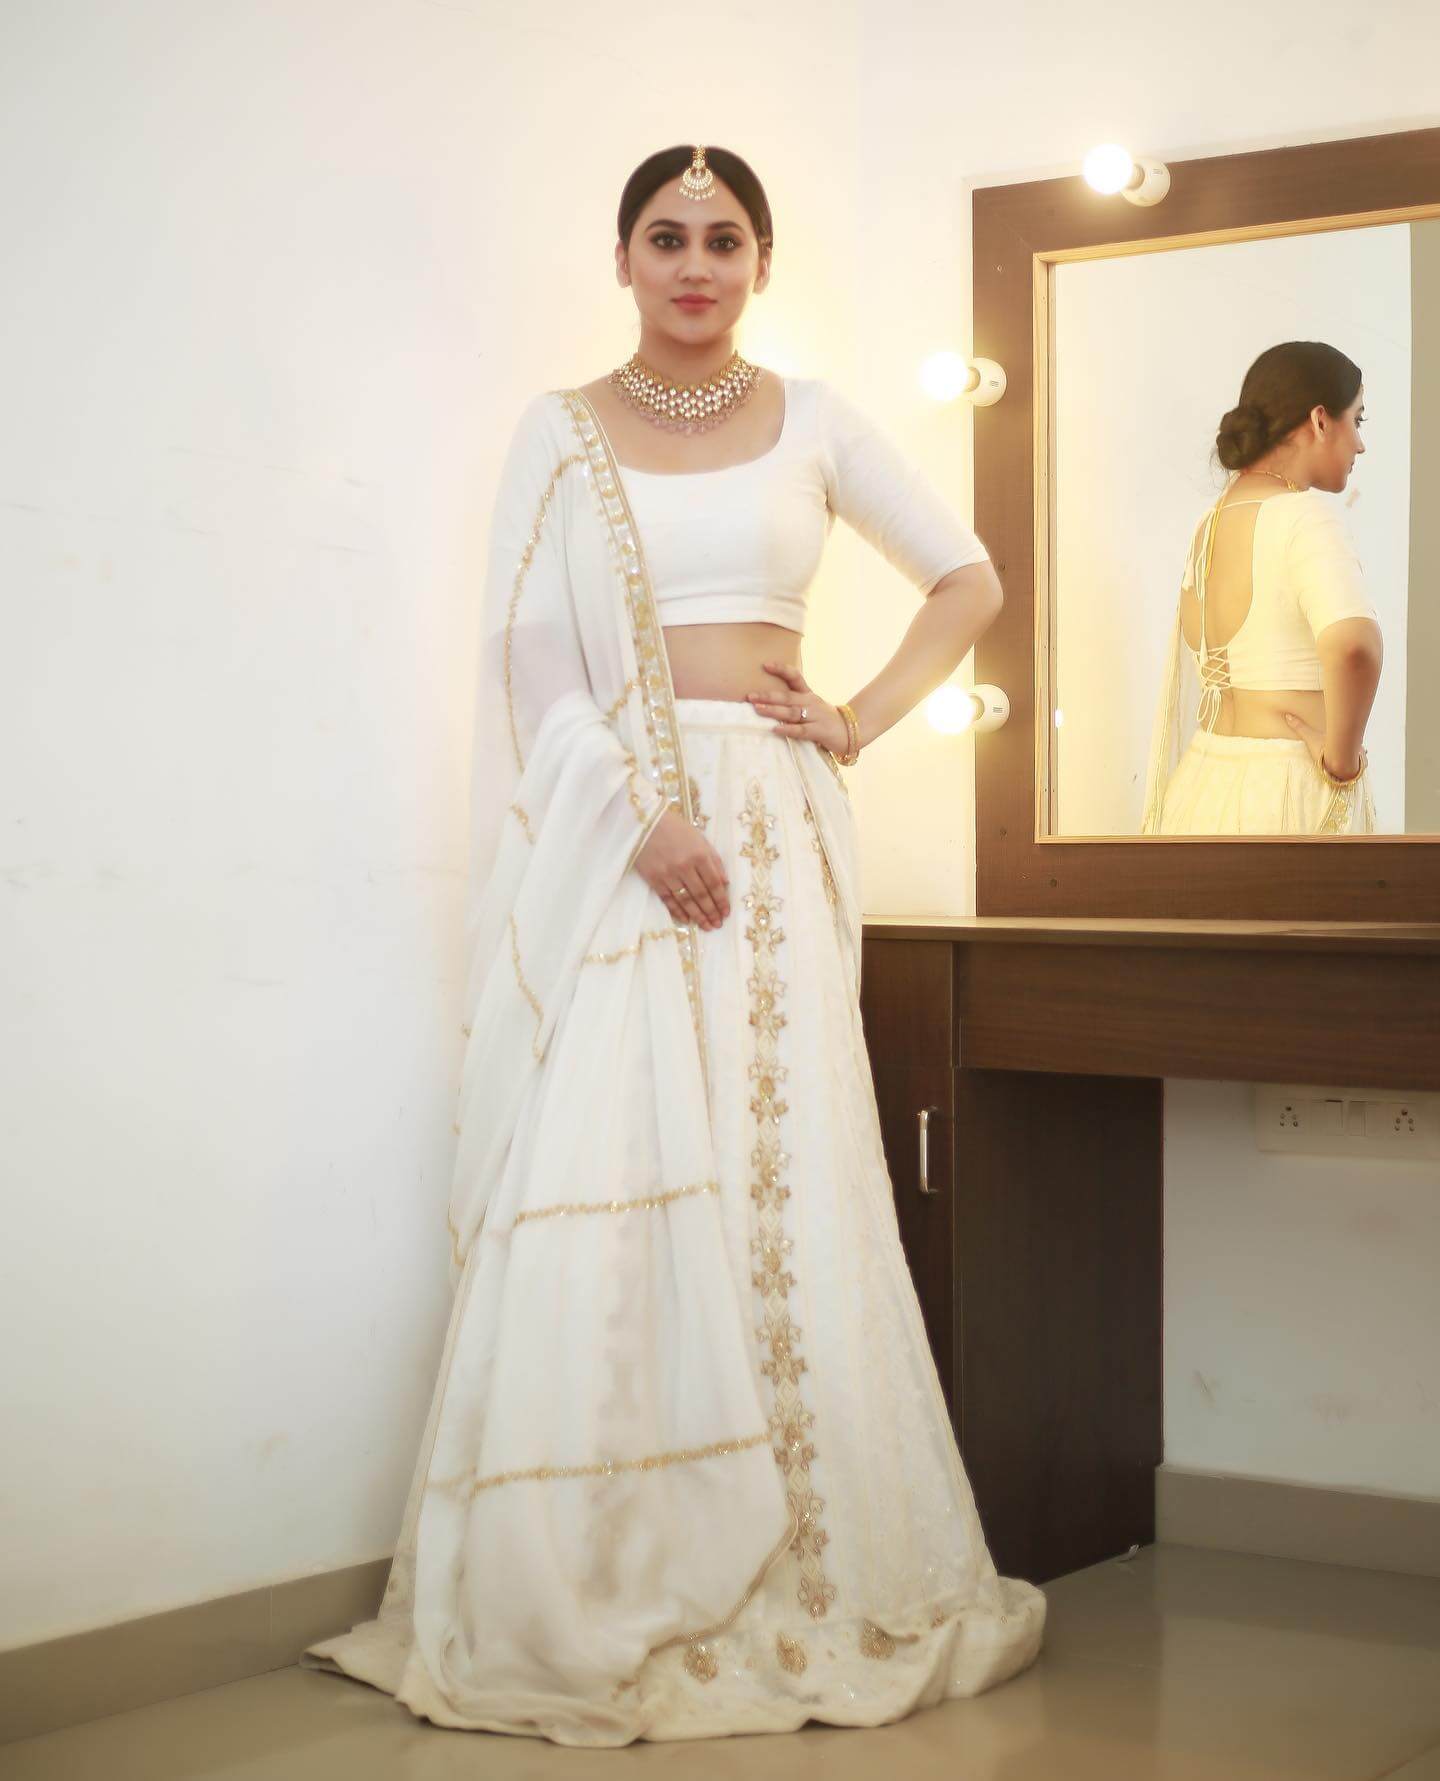 Gorgeous Miya George Chic Look In White Embroidered Lehenga With Beautiful Jewellery Set